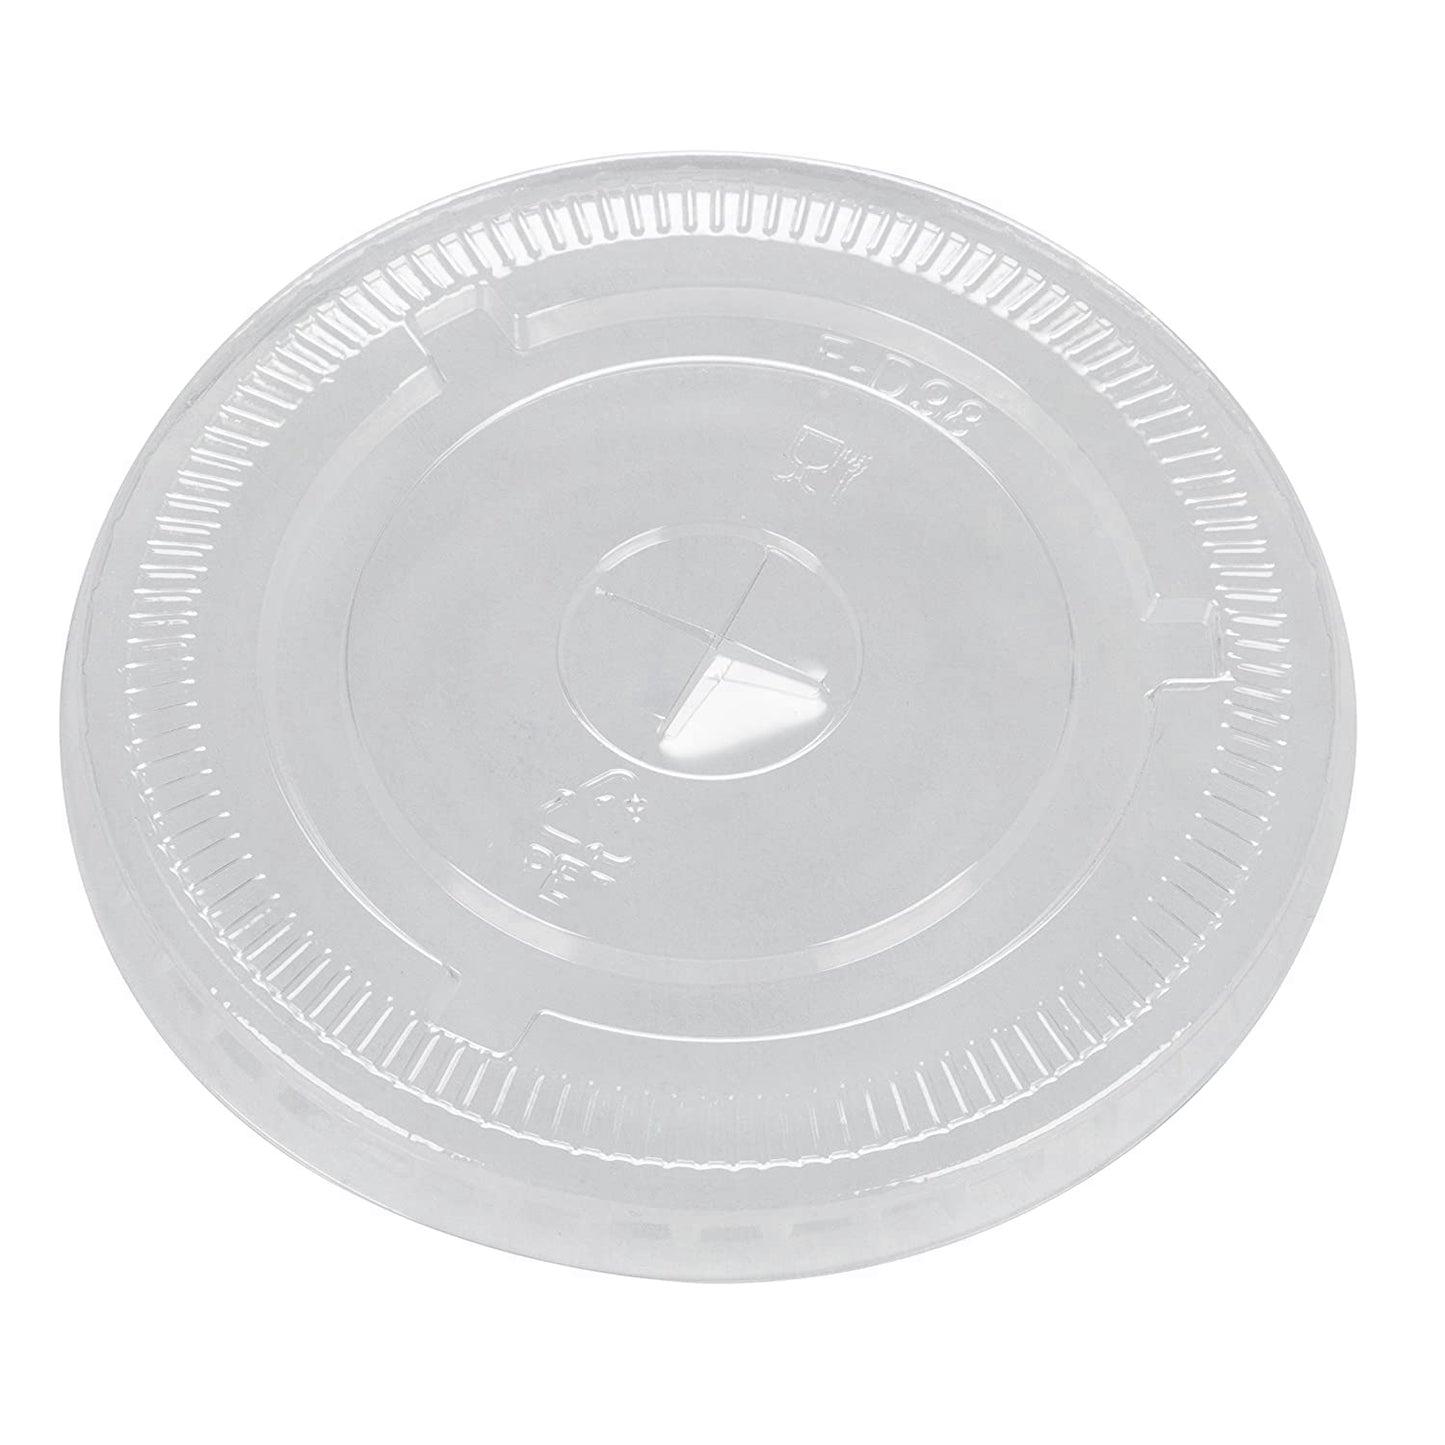 Clear Flat Lids with Straw Slot Fits on 12, 16, 20, and 24 oz. Cups Tops & Straw OnlyOneStopShop   